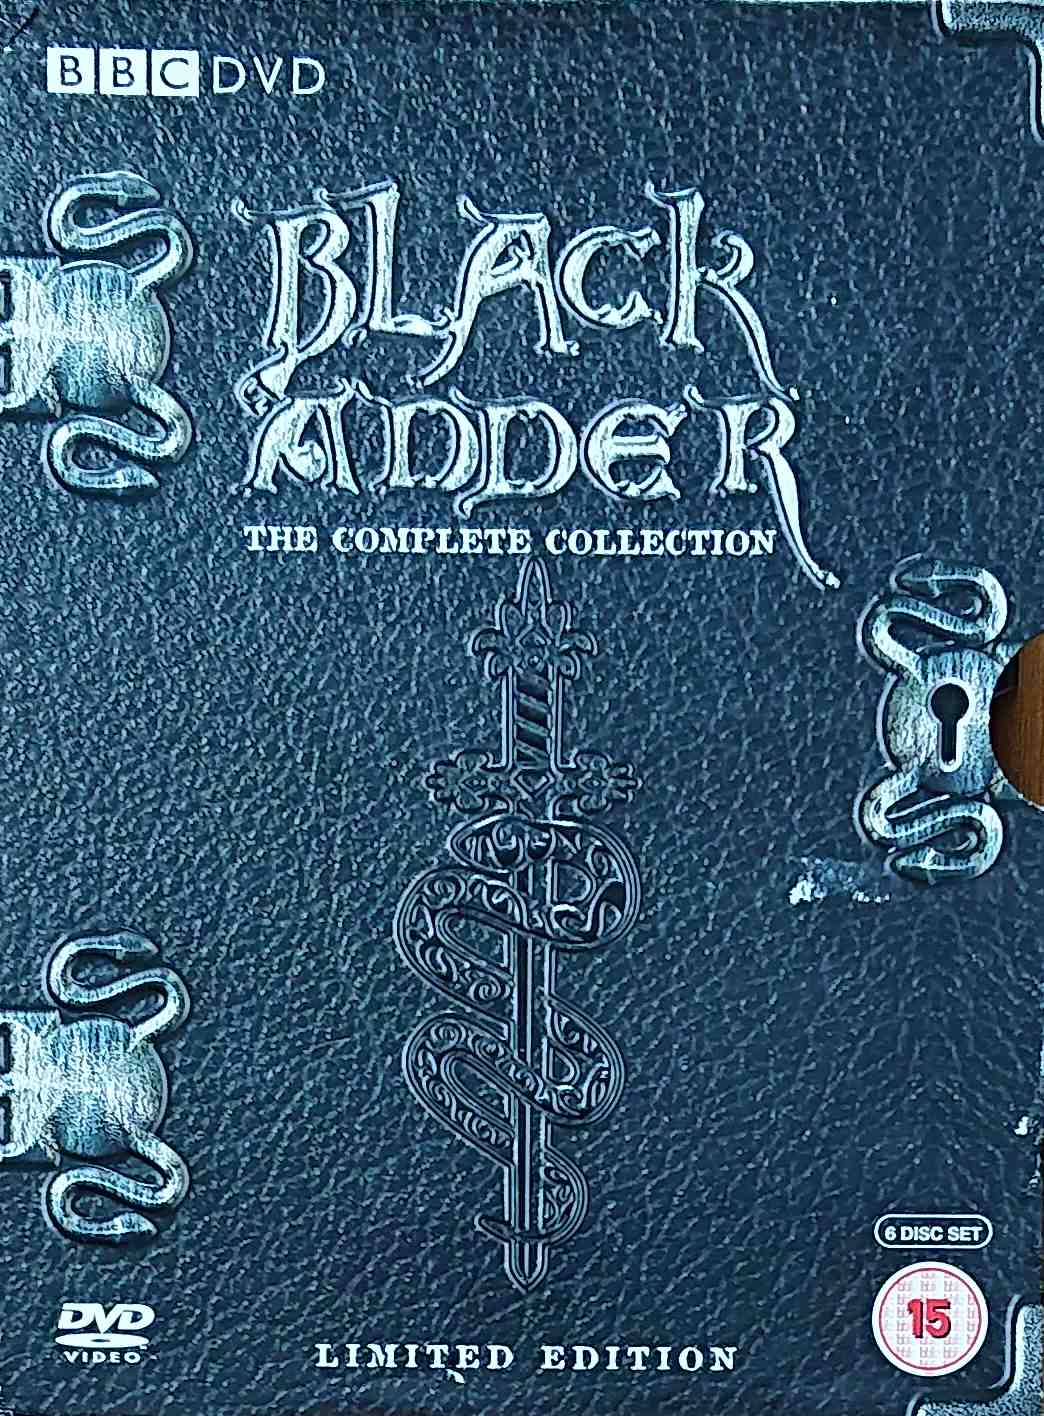 Picture of BBCDVD 1746 Black Adder - The complete collection by artist Richard Curtis / Rowan Atkinson / Ben Elton from the BBC records and Tapes library